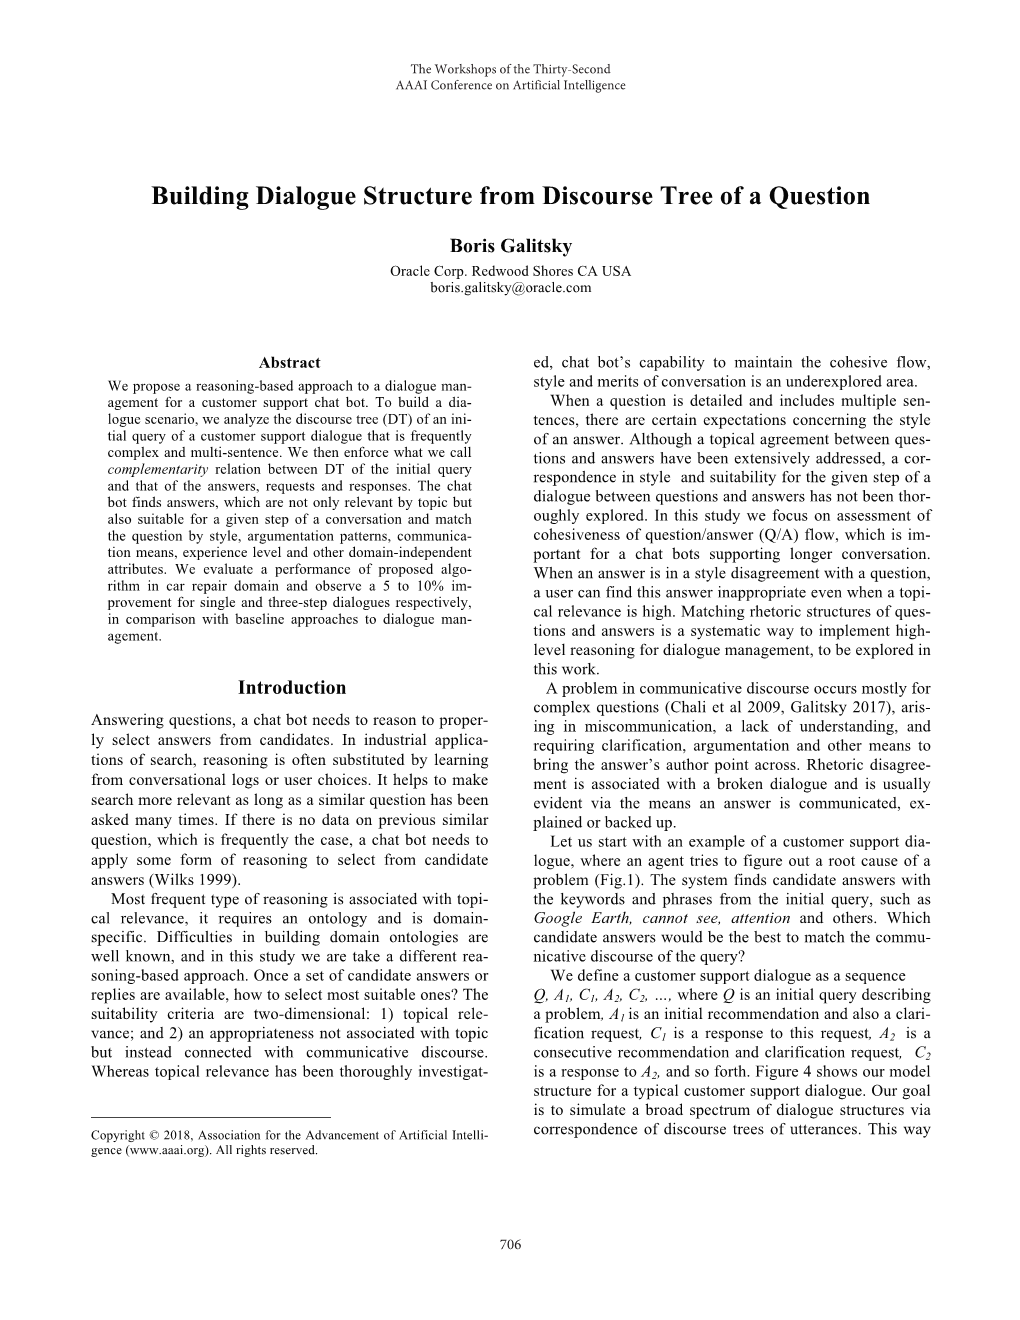 Building Dialogue Structure from Discourse Tree of a Question